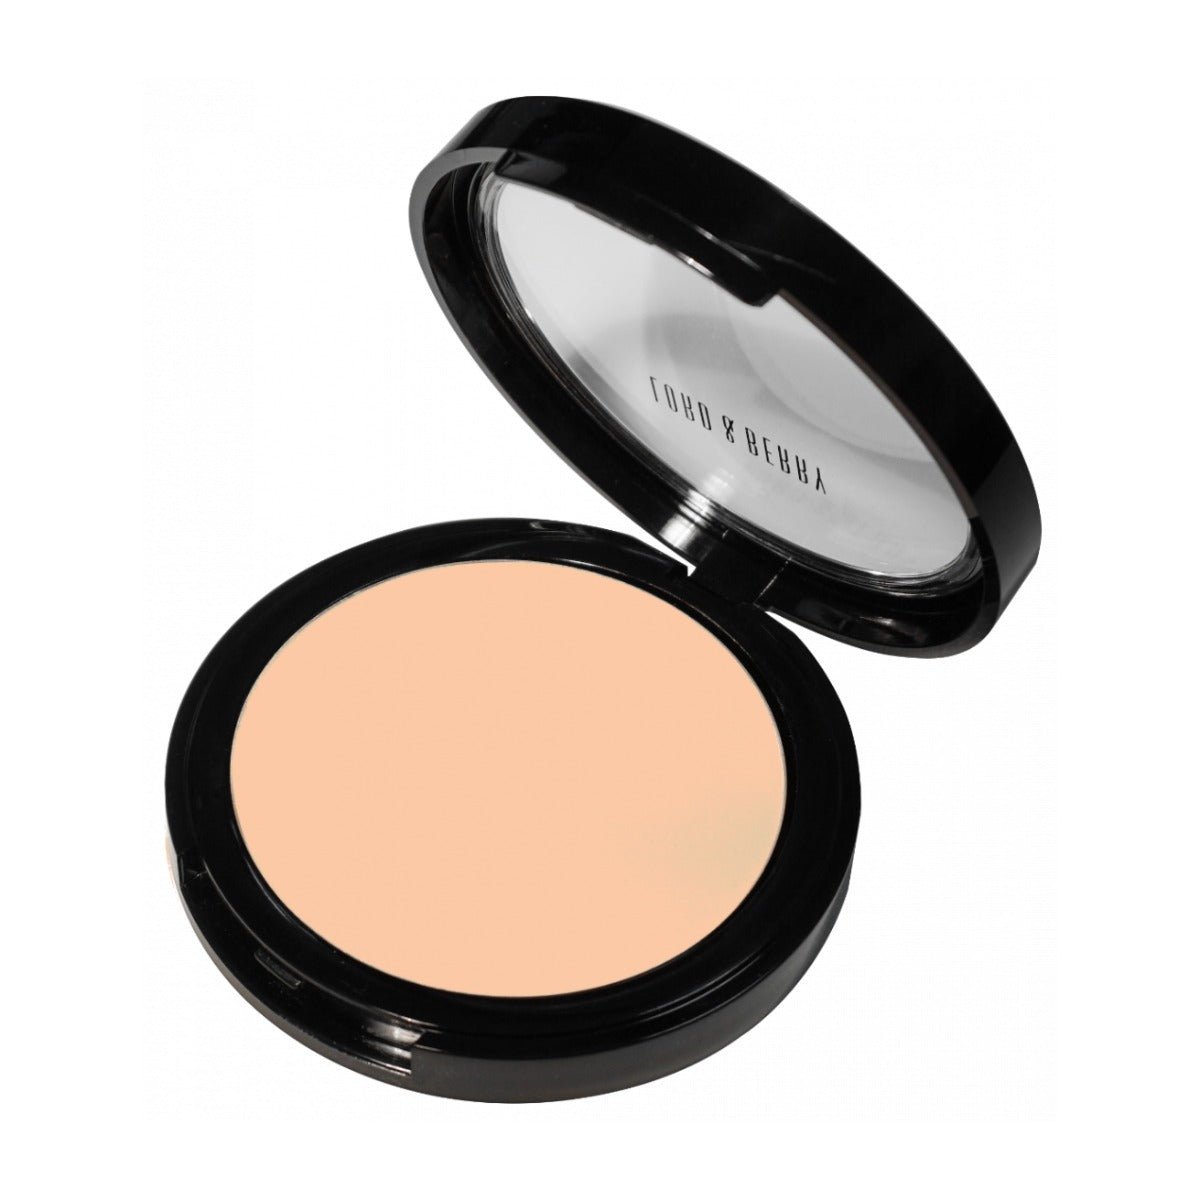 Lord & Berry Face Pressed Powder - Bloom Pharmacy